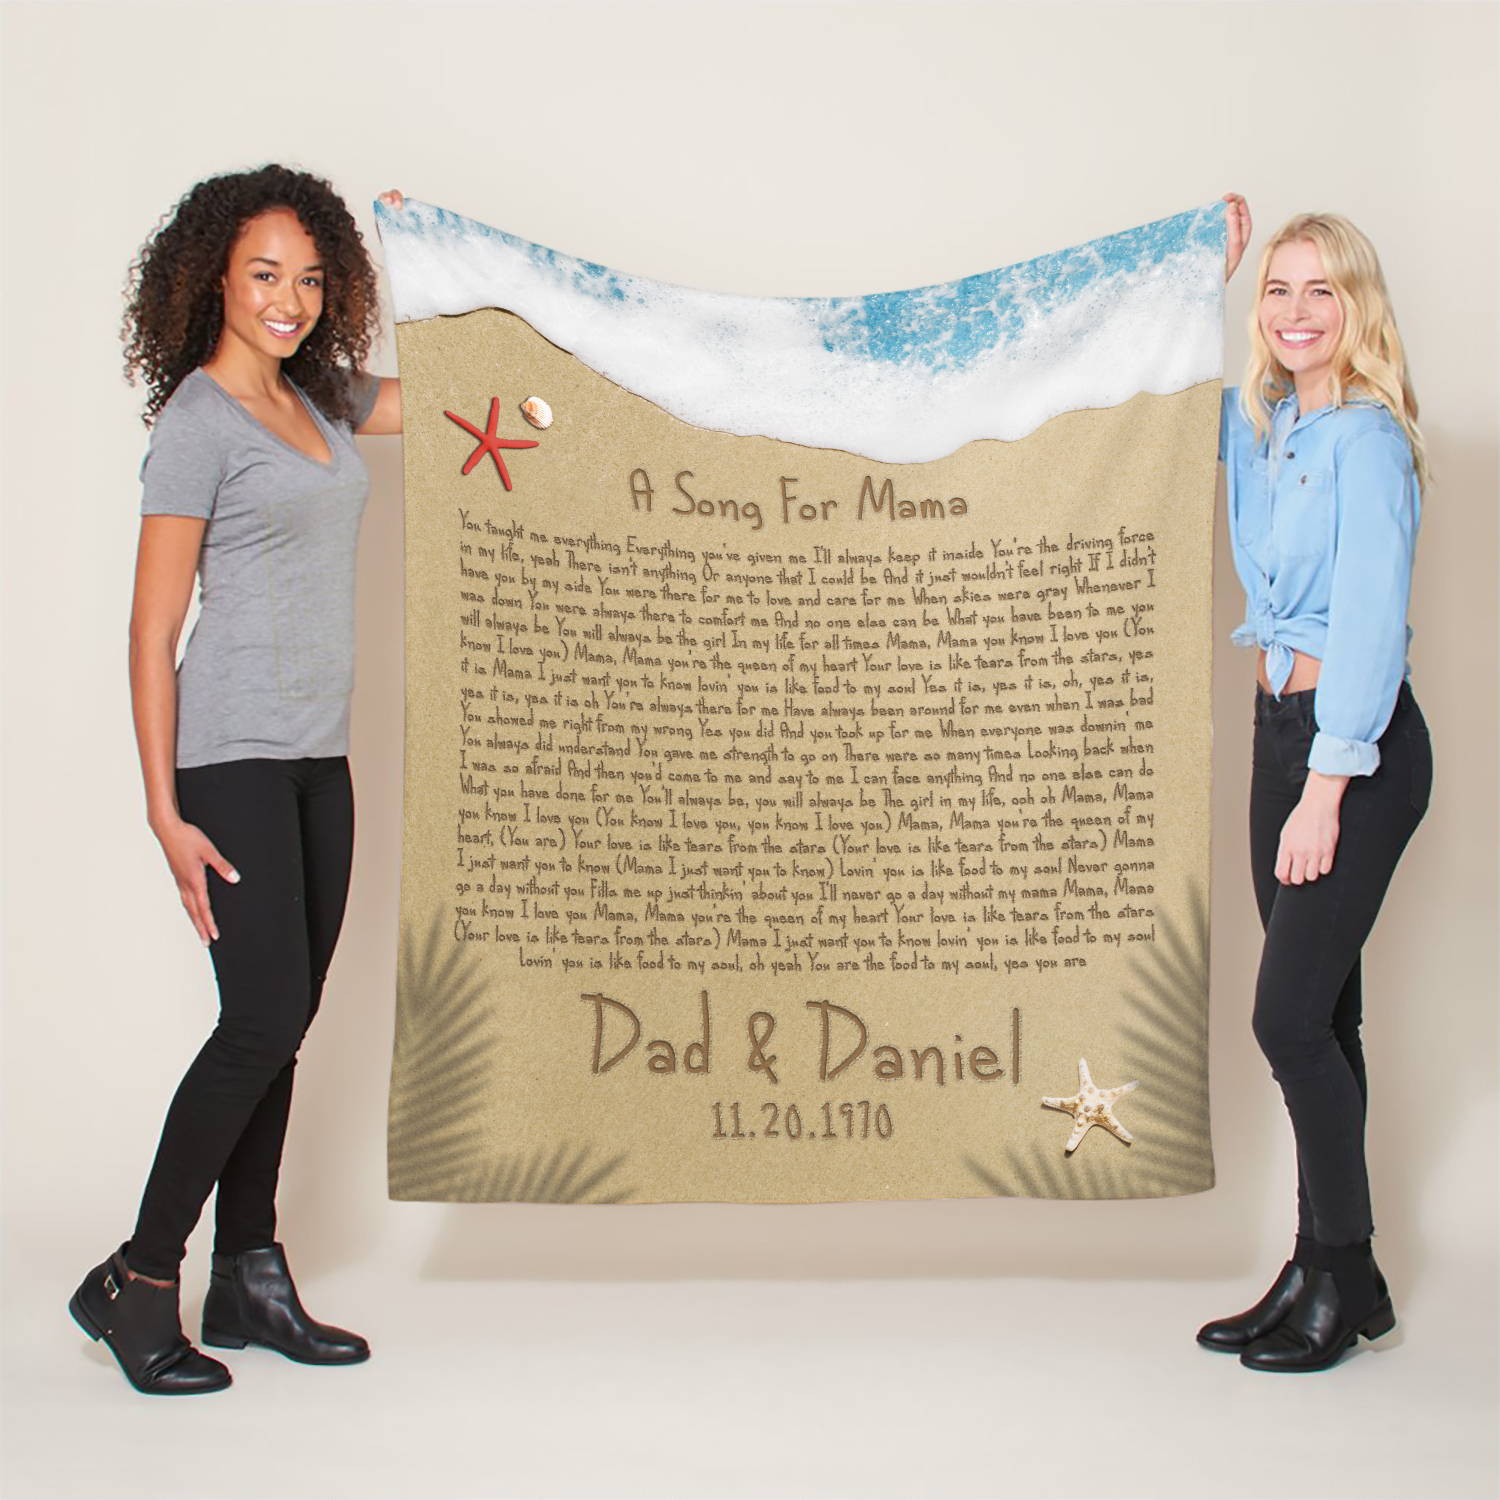 a rectangular blanket print Song Lyrics, names, and date on a sand beach image background is the perfect gift for mom